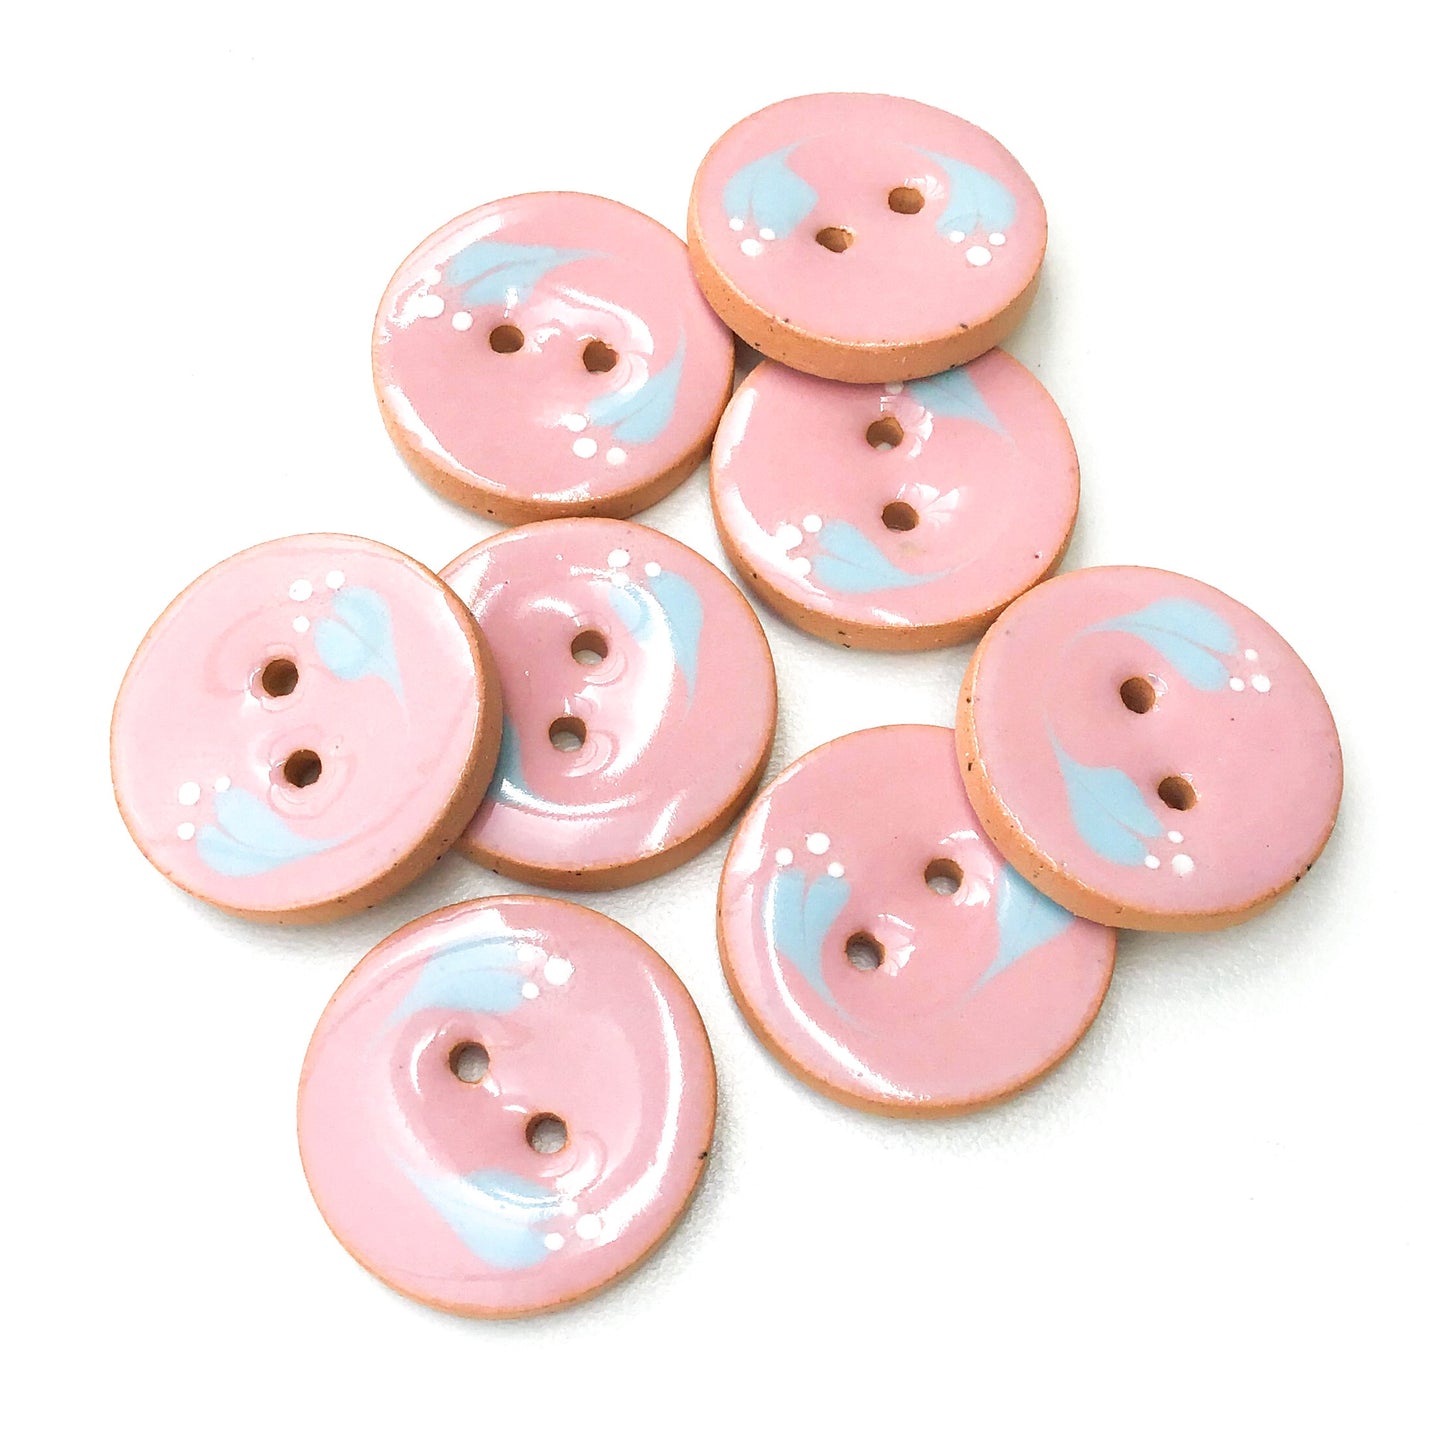 Pink Ceramic Buttons with Sky Blue Floral Design - Pink Clay Buttons - 7/8"